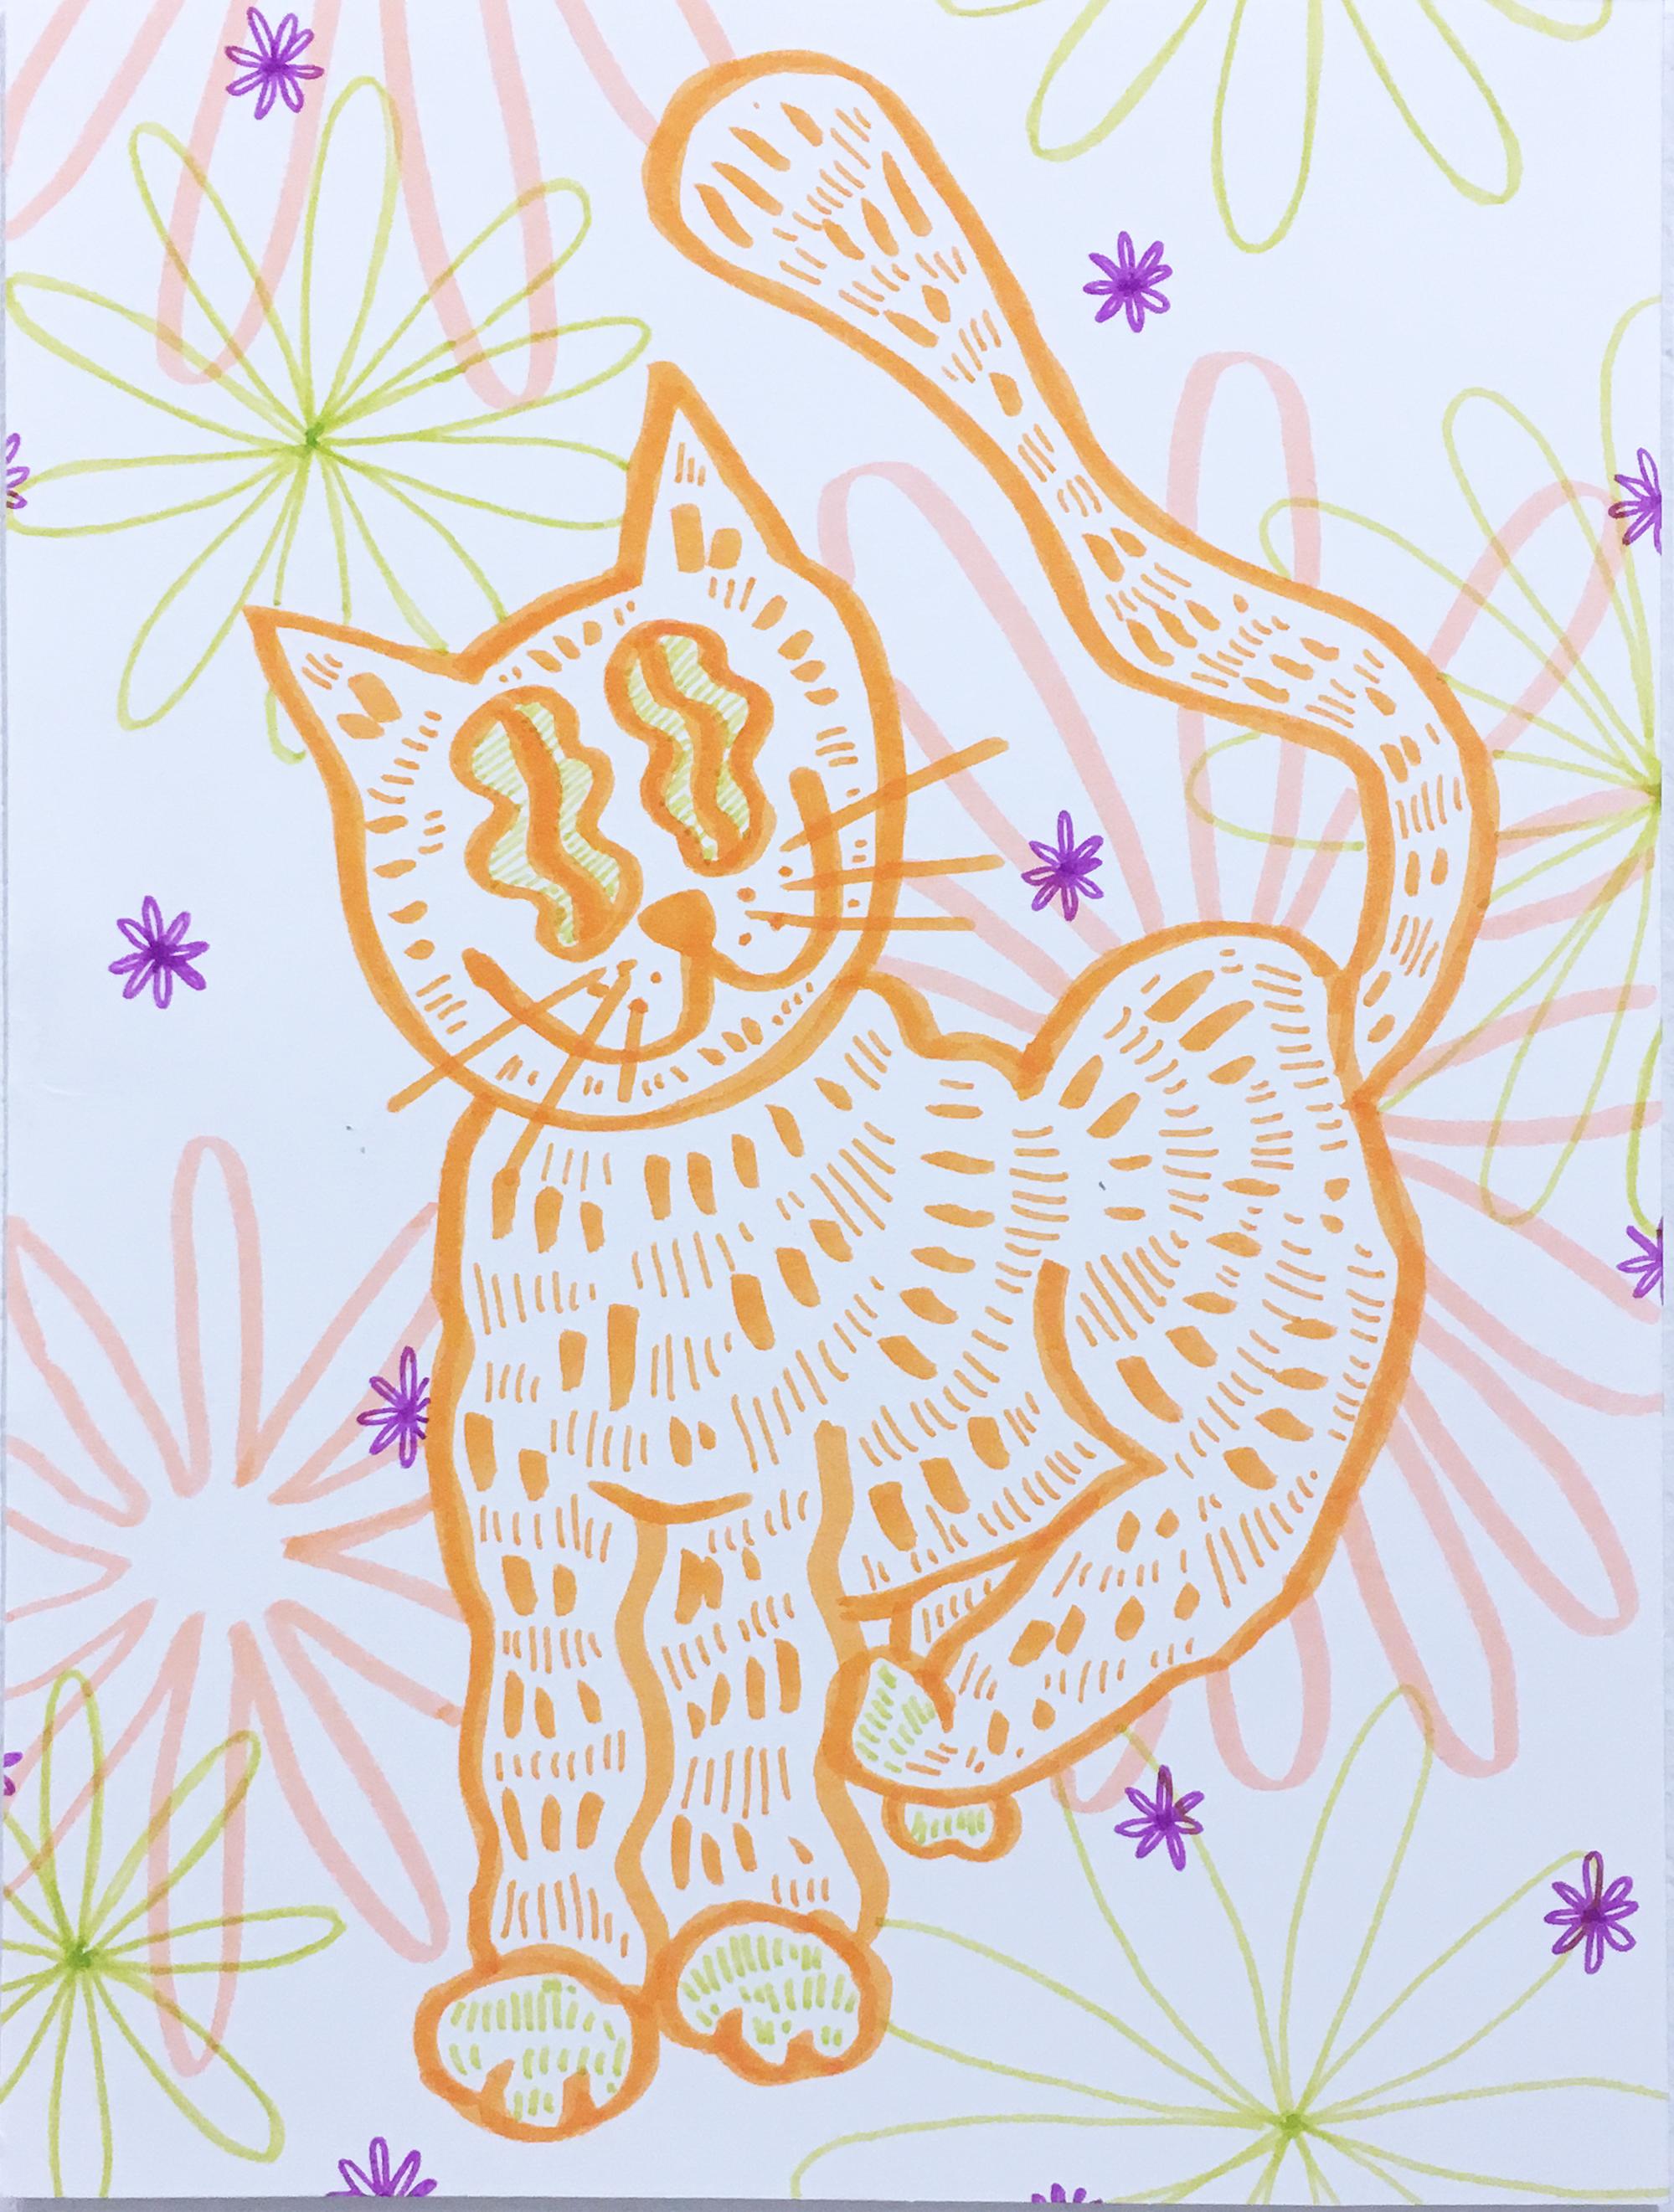 Soft and Fuzzy, Watercolor Paper Drawing, Cat with Flowers, Graphic Wavy Pattern